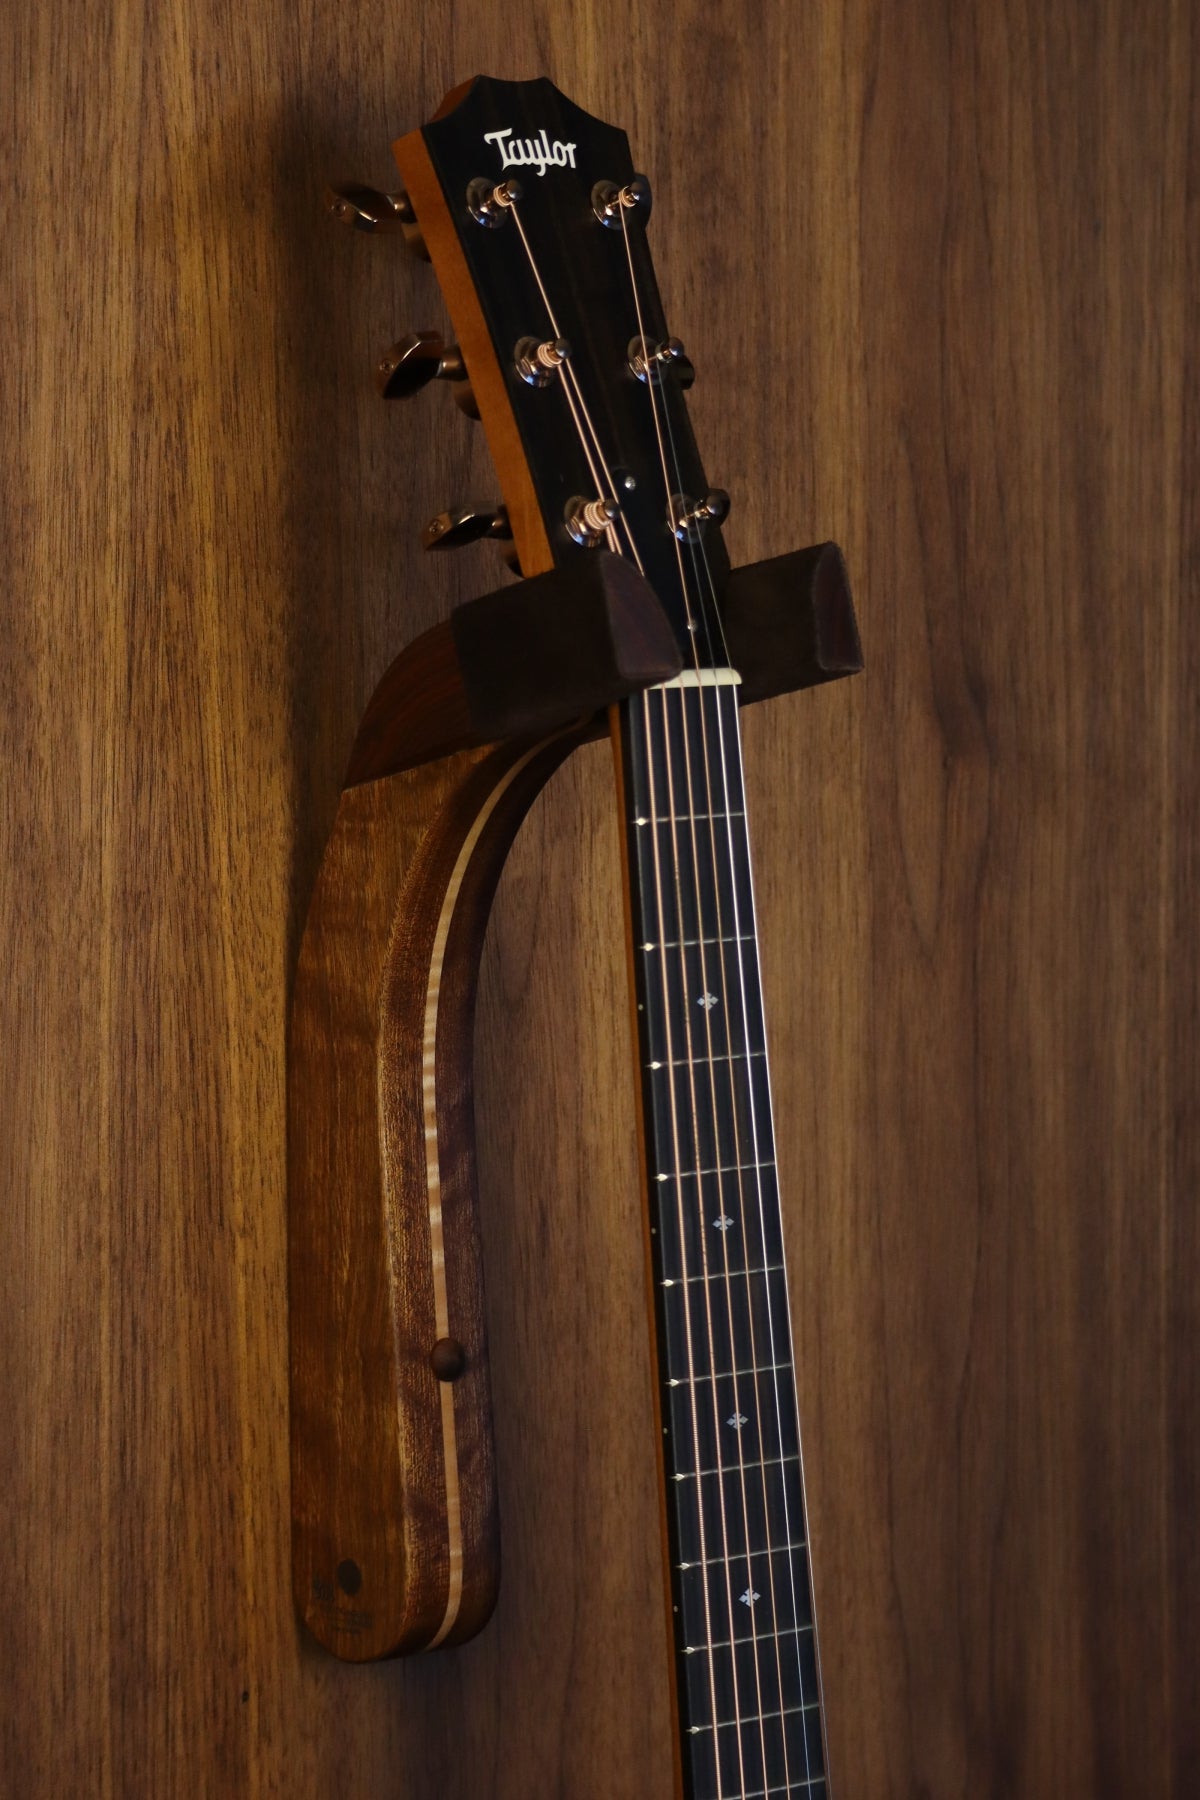 Chechen Caribbean rosewood and curly maple wood guitar wall mount hanger installed on paneled wall with Taylor guitar